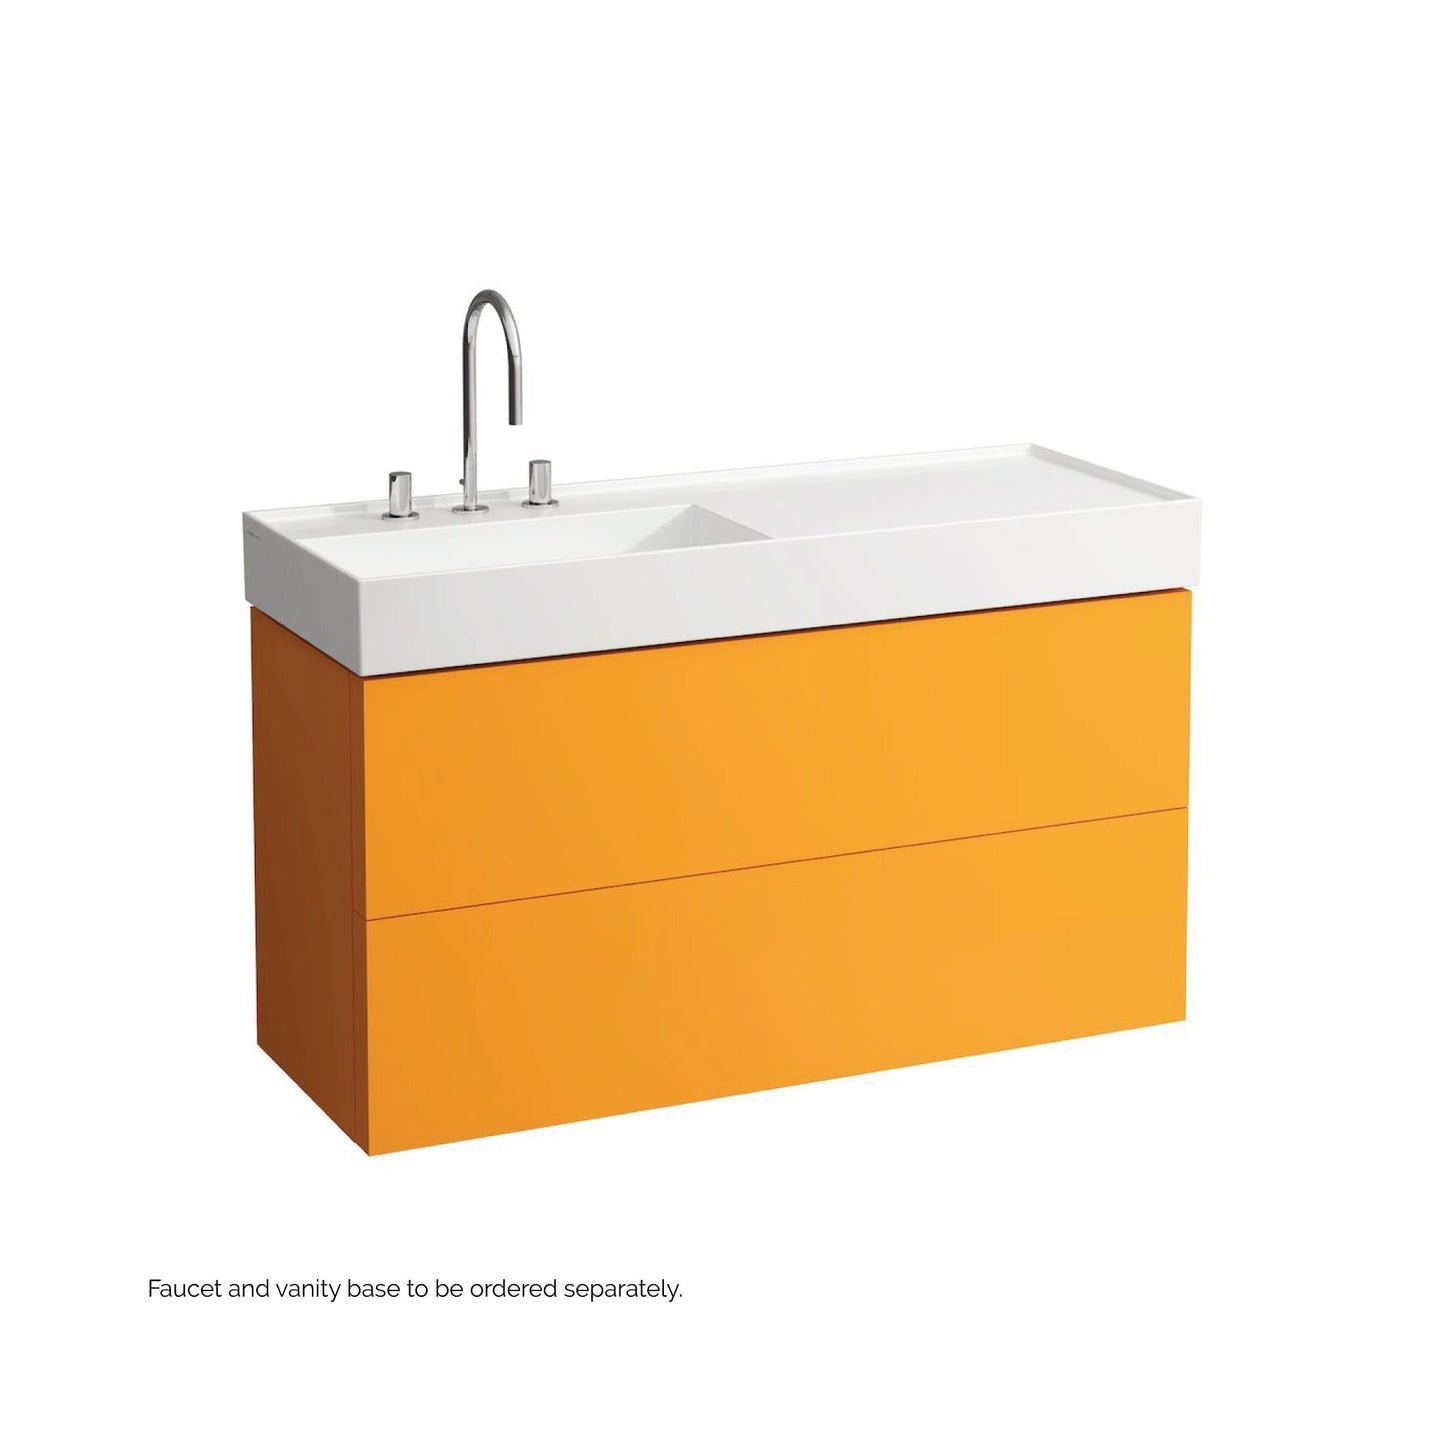 Laufen Kartell 47" x 18" White Wall-Mounted Shelf-Right Bathroom Sink With 3 Faucet Holes